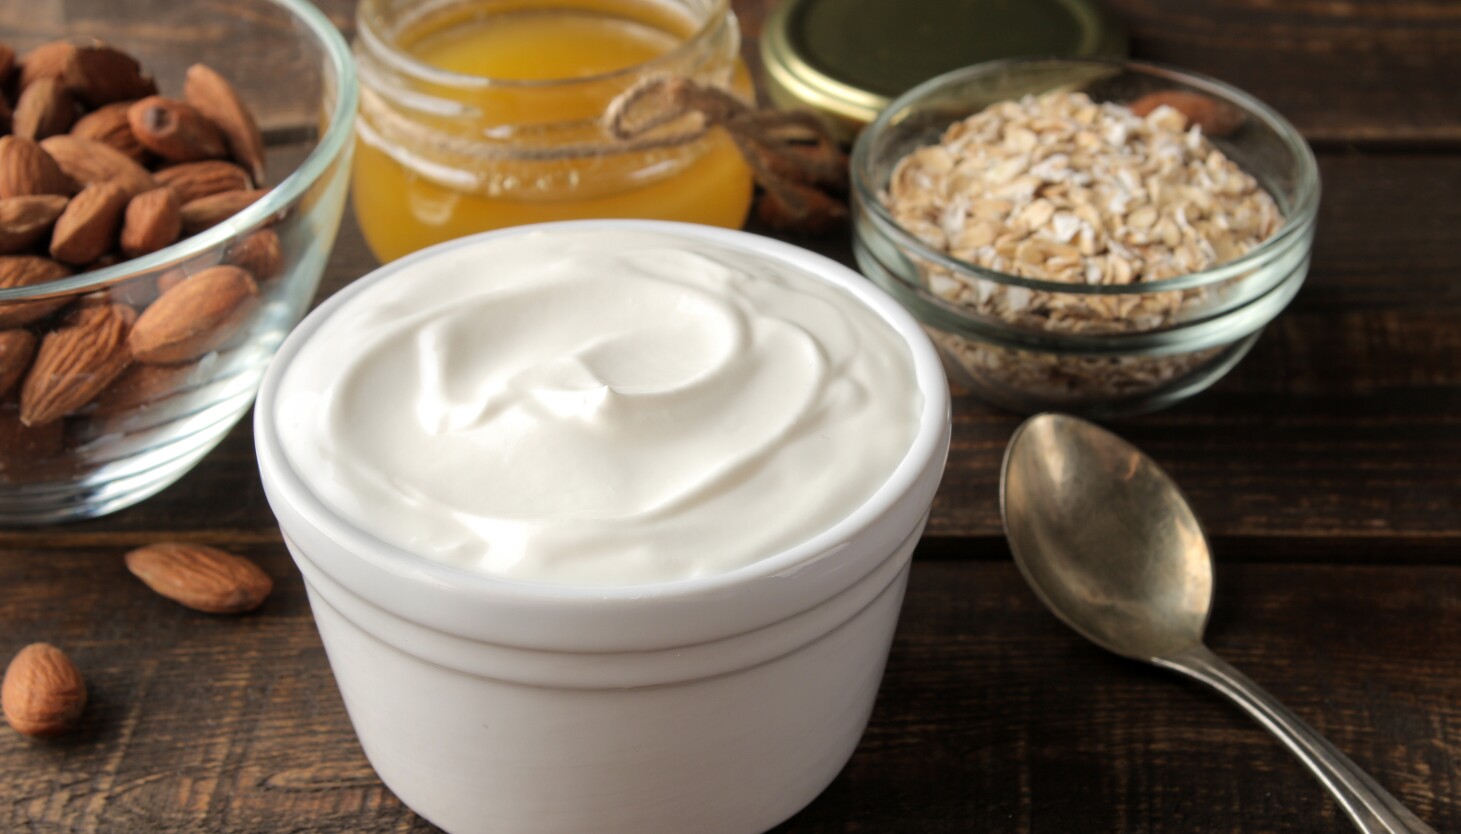 What are the healthiest types of yogurt?